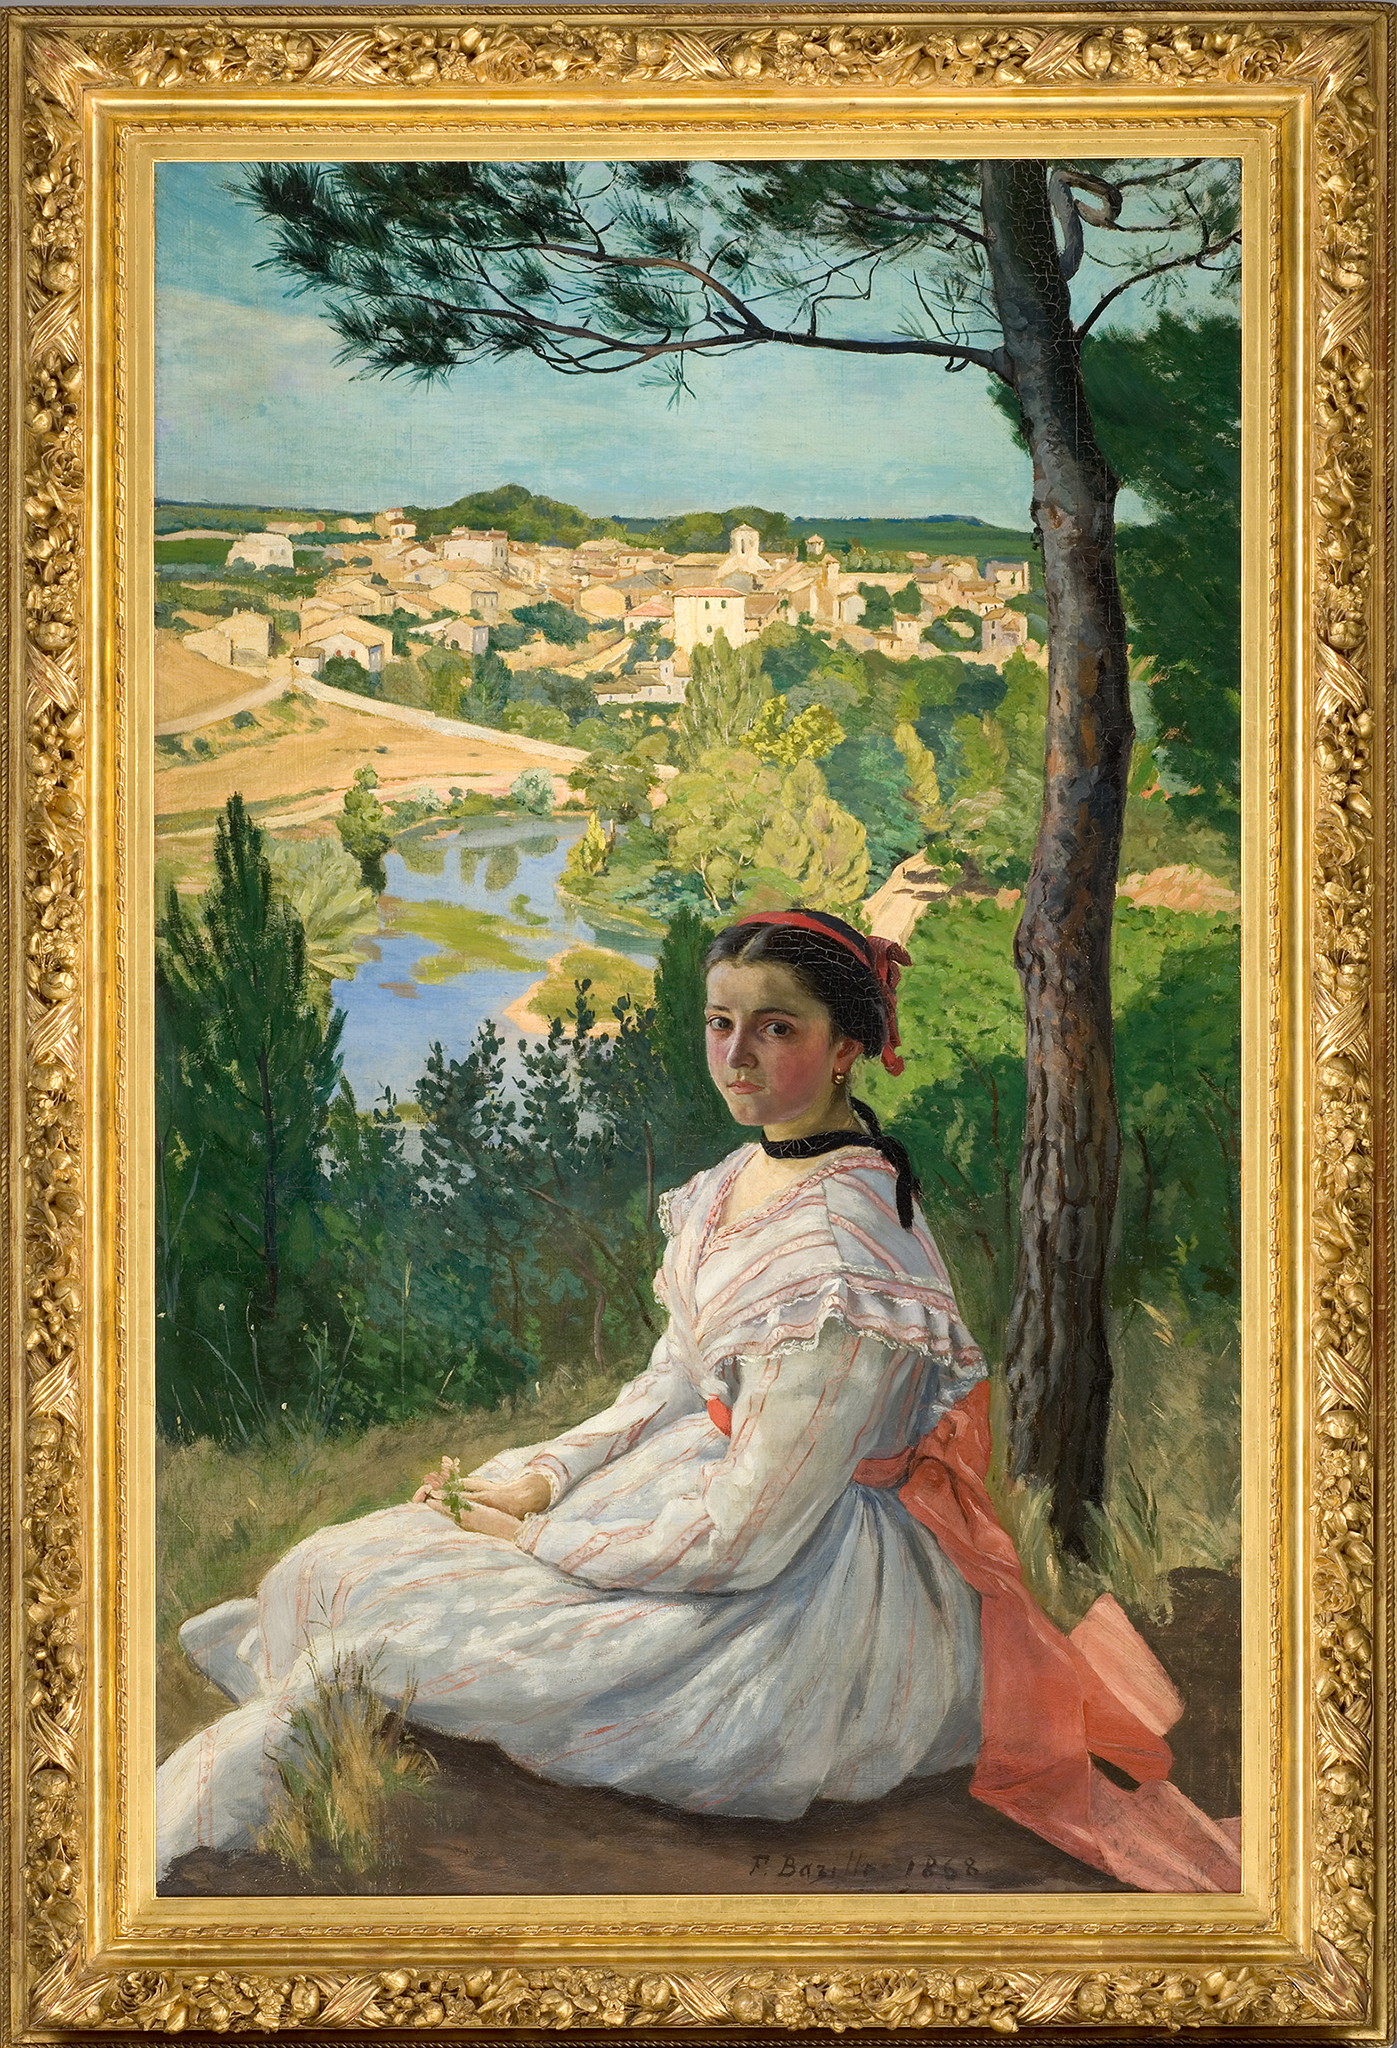 A painting of a girl wearing a white dress with oranges strips and tie around her waist. She sits with her hands on her lap along the grass under a tree. In the background, there is a is a lake in front of a large town.